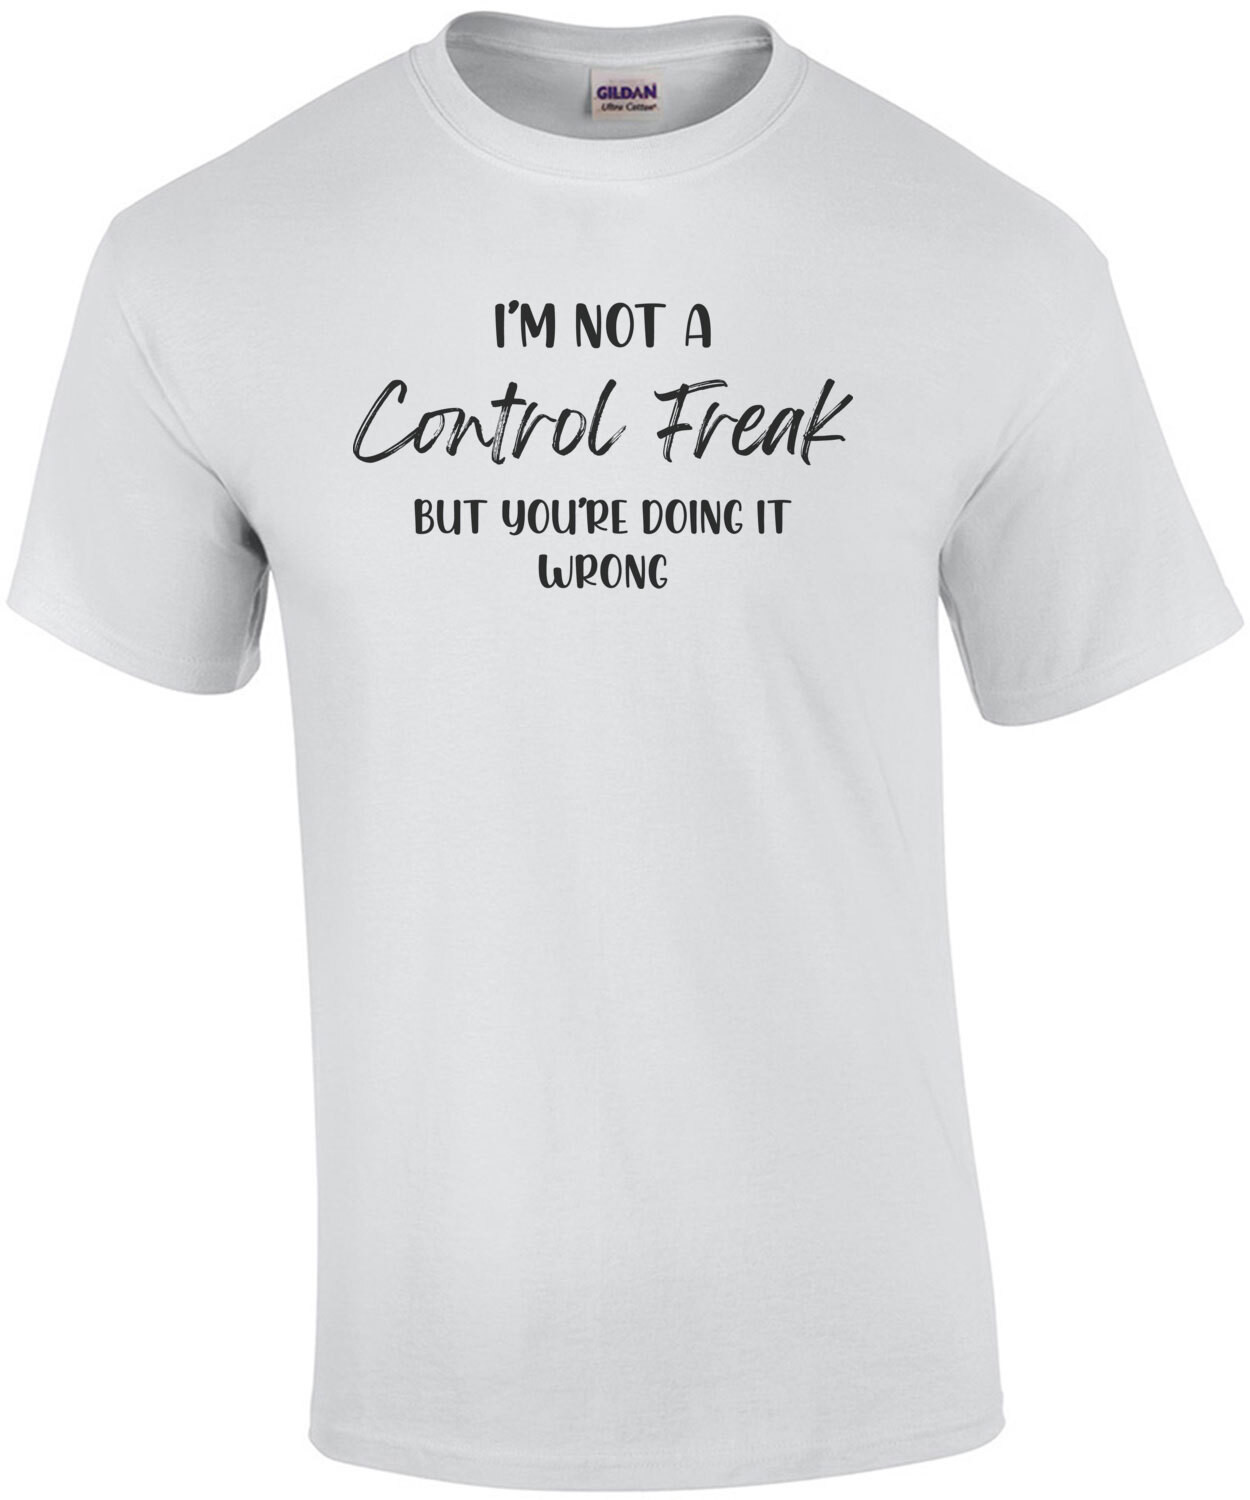 I'm Not a Control Freak but you're doing it wrong - funny sarcastic t-shirt